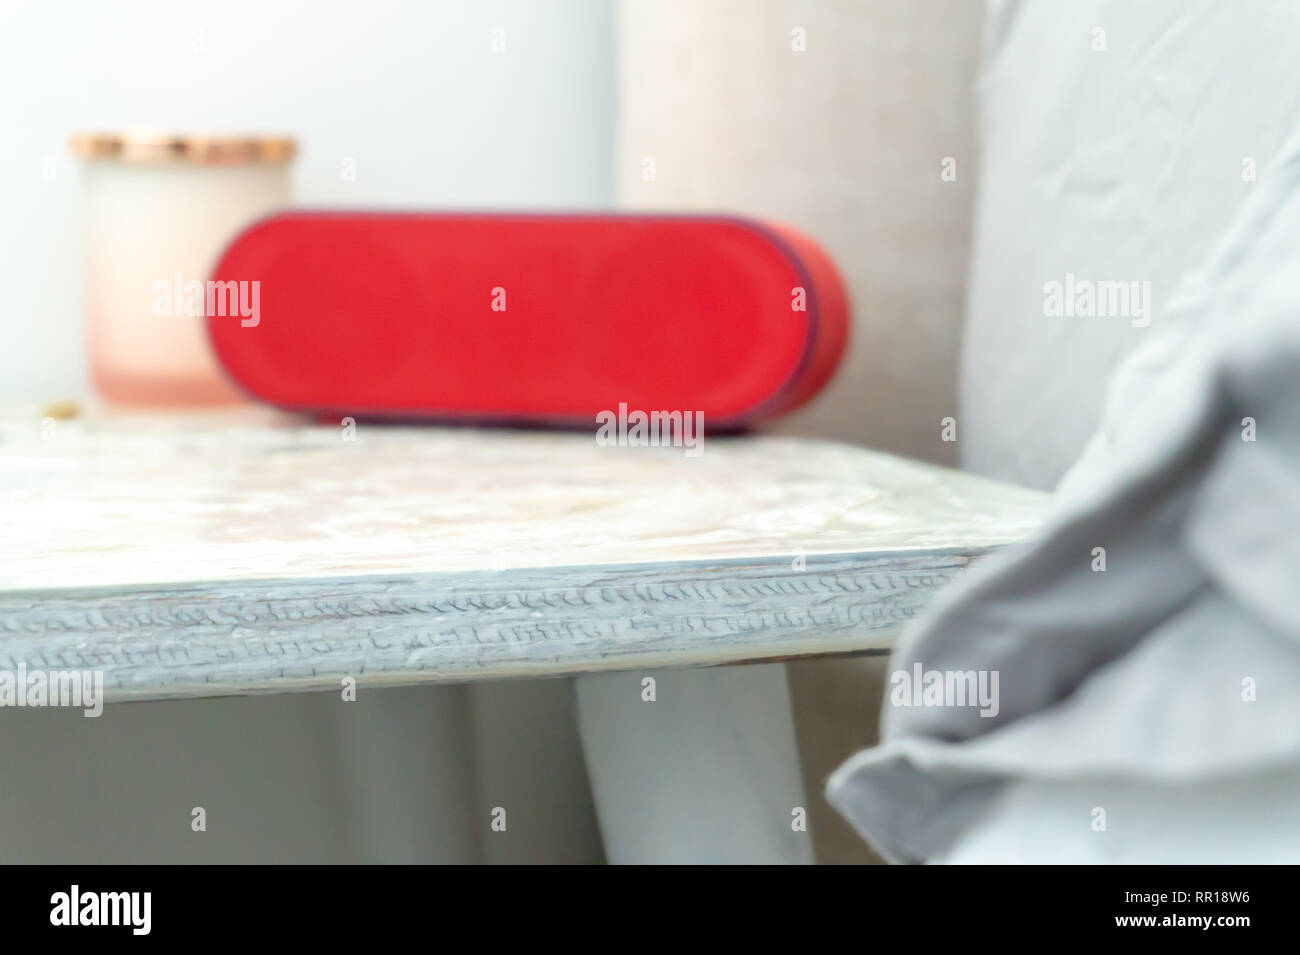 Bright red radio alarm clock and candle jar on a bedside table nightstand, with bed and linens showing in soft colors. Stock Photo